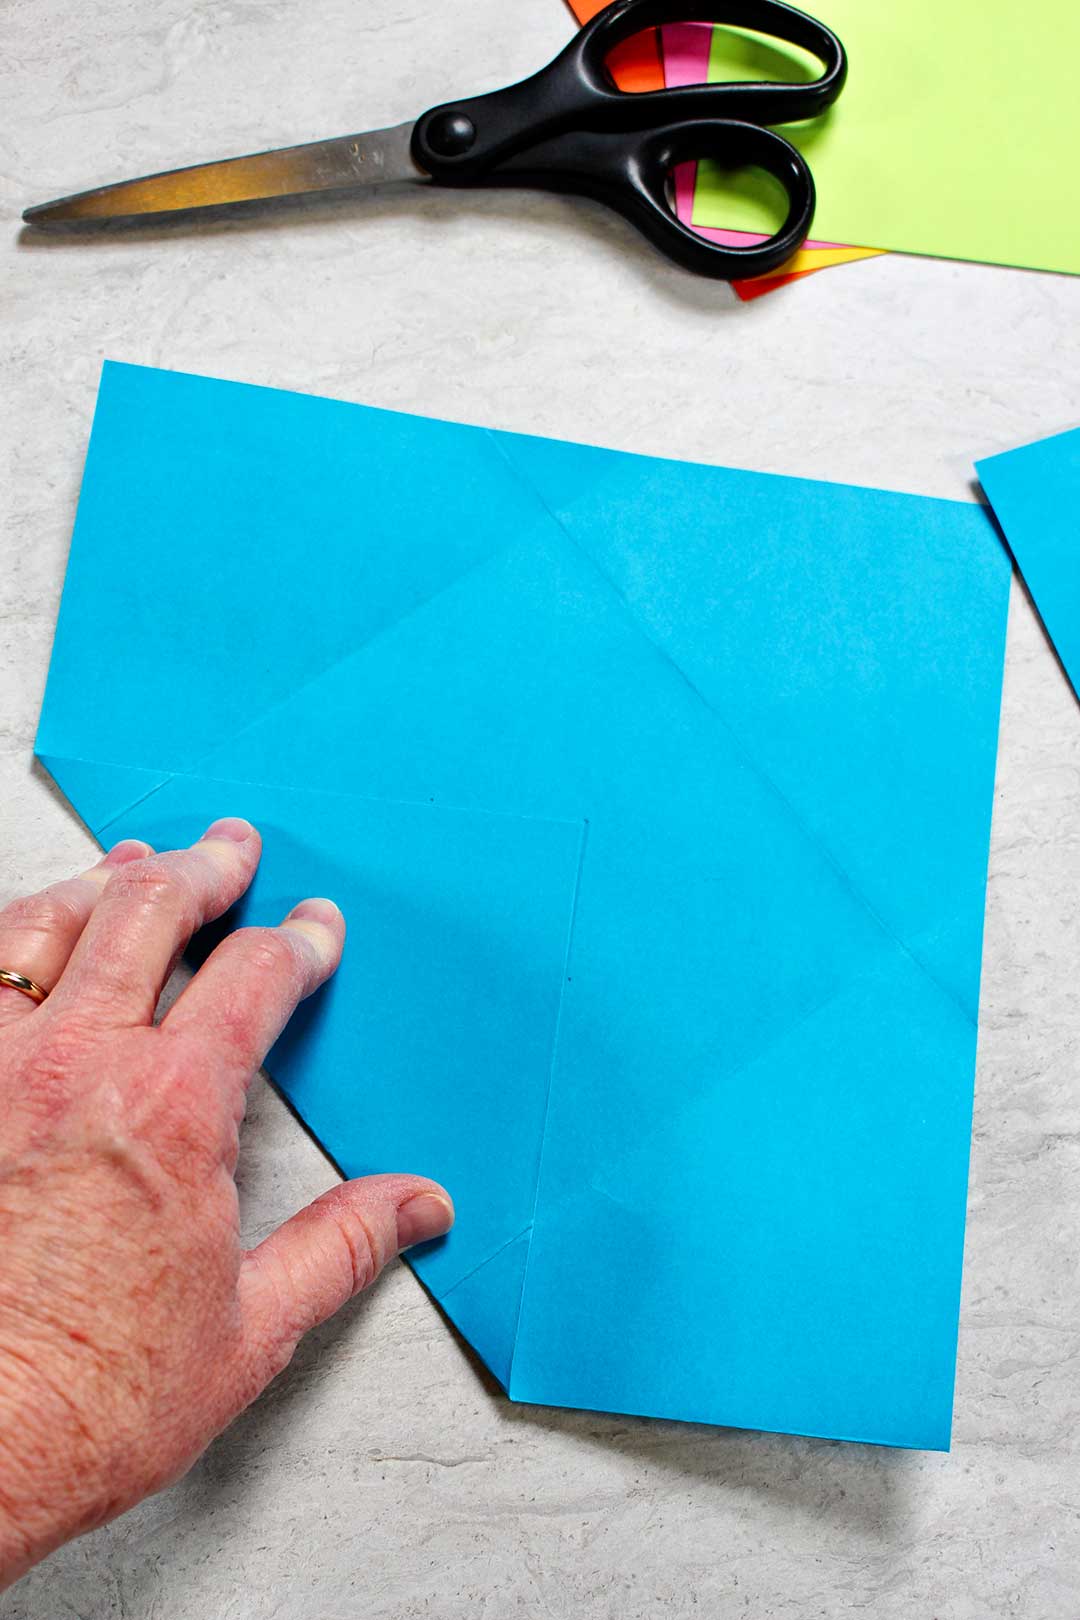 Folding a corner of a blue square of paper to make a homemade envelope.